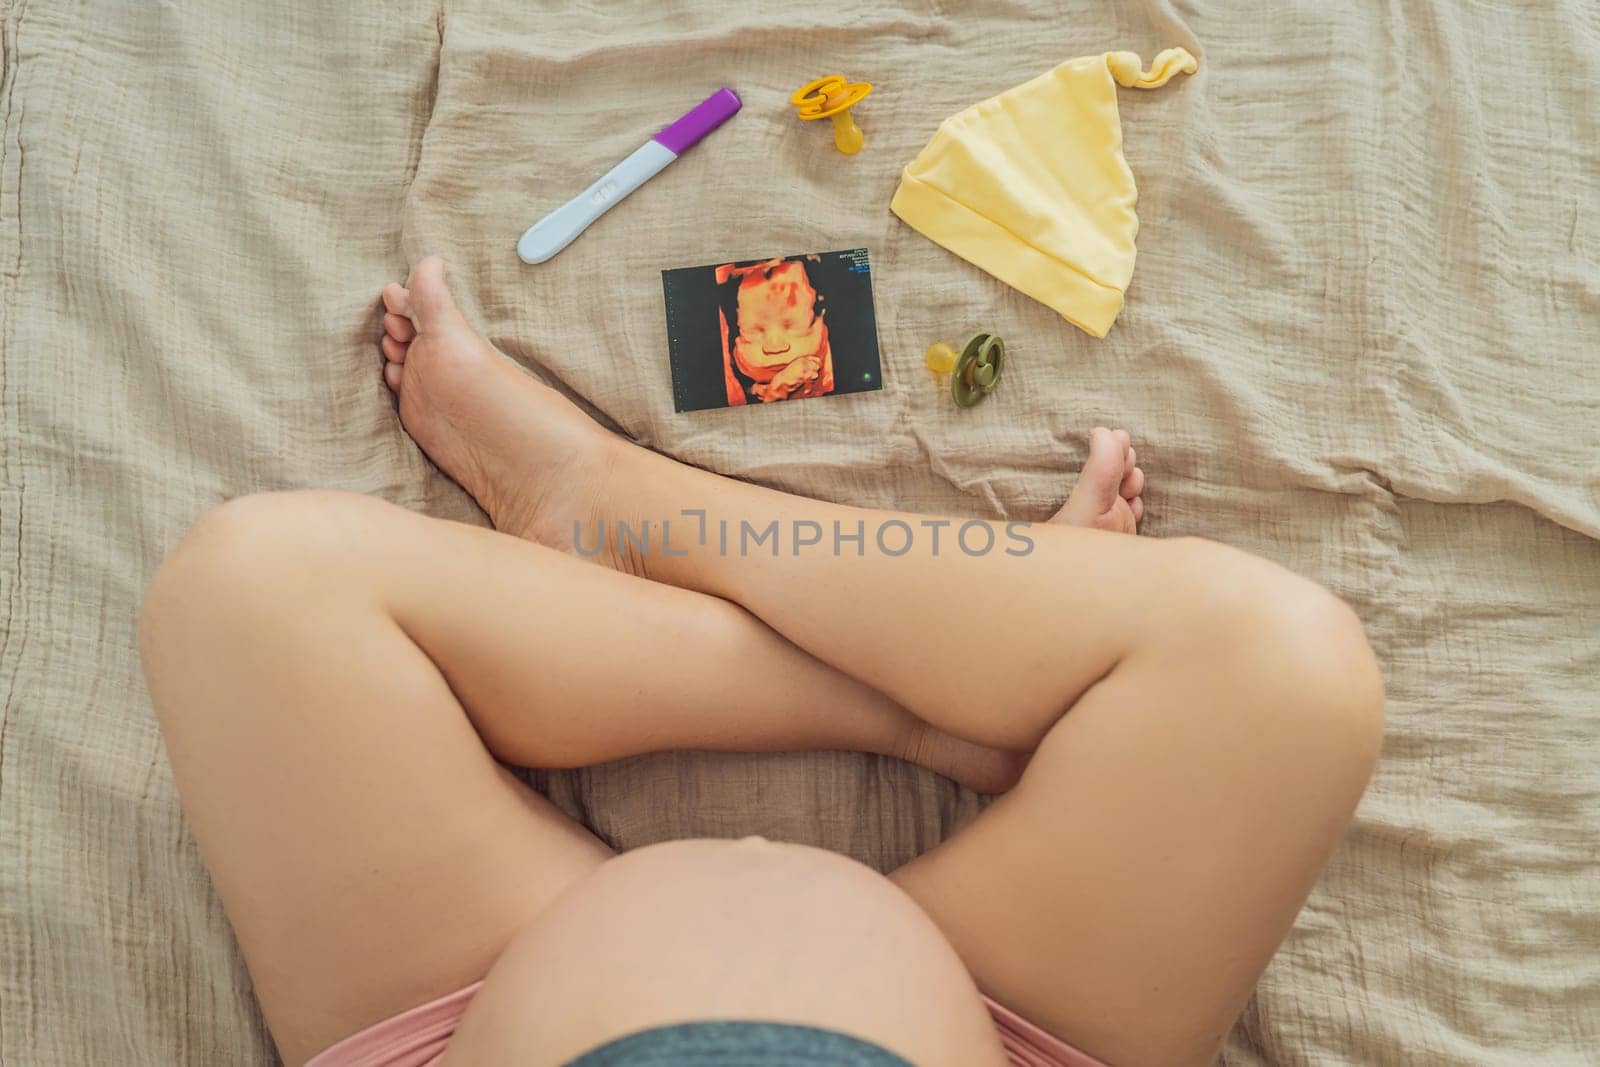 A composition of essential pregnancy attributes: a positive pregnancy test, ultrasound image, tiny pacifier, and a soft baby's cap, embodying the journey to motherhood by galitskaya